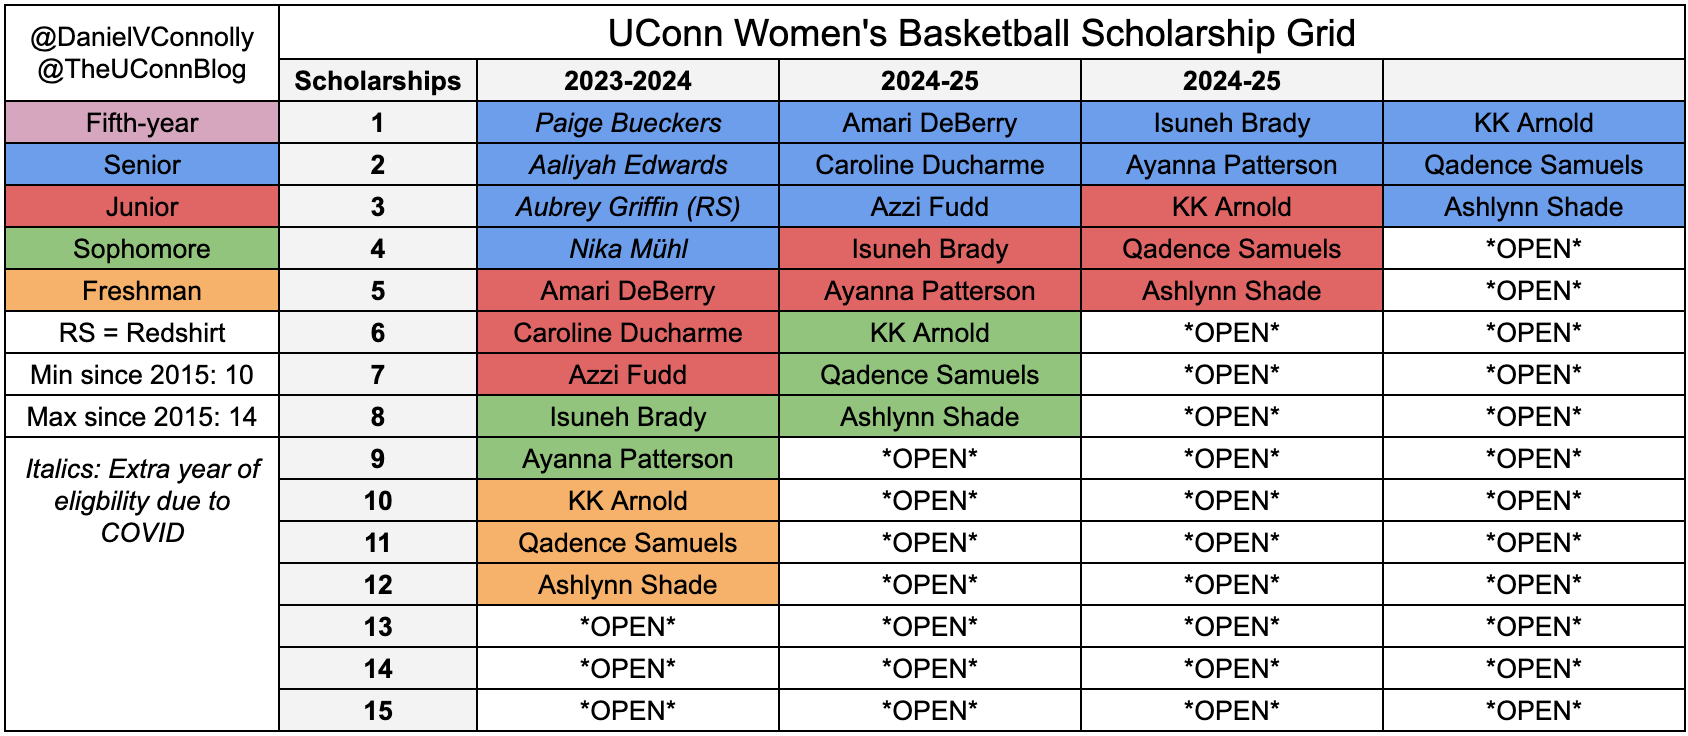 UConn's summer 2022 recruiting preview - by Daniel Connolly